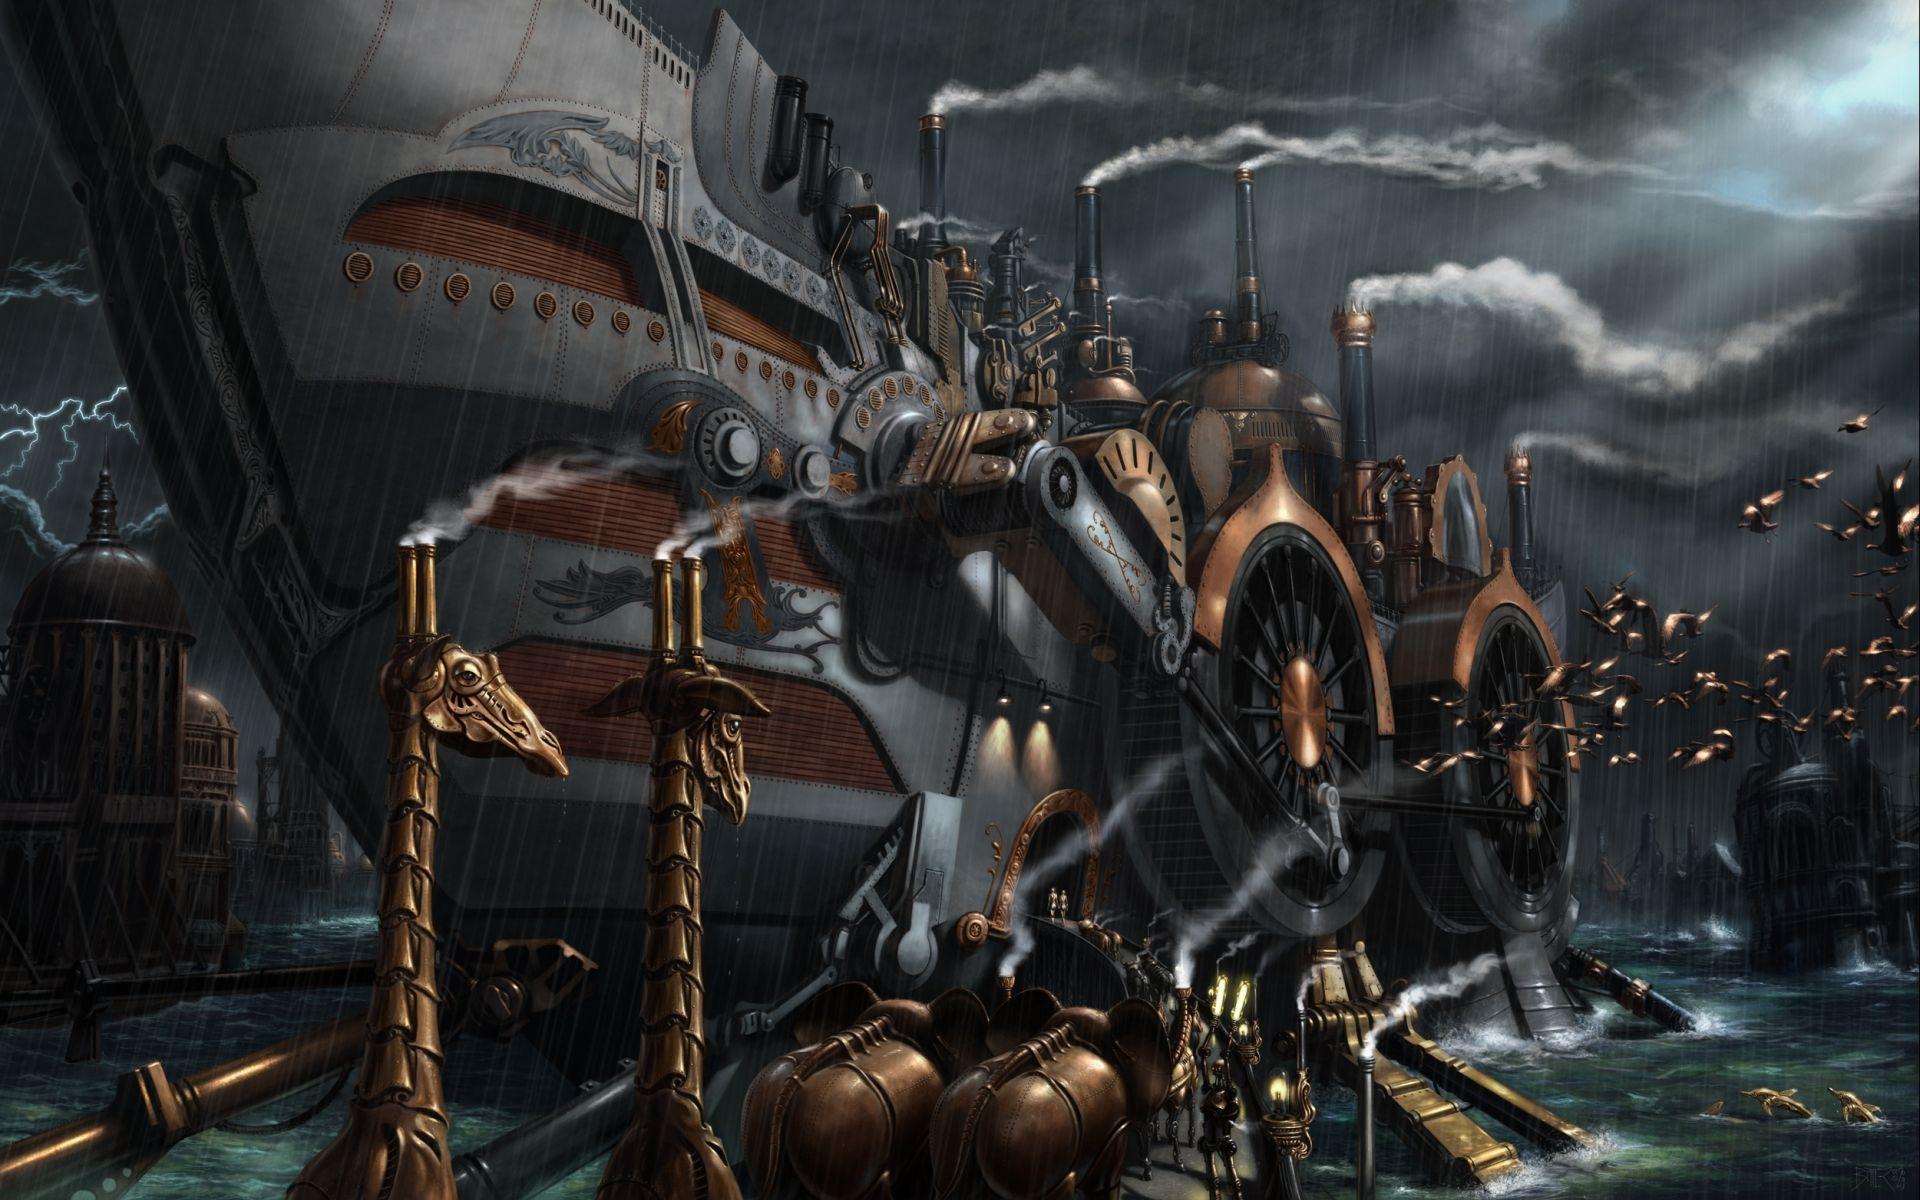 Land ship steampunk wallpaper and image, picture